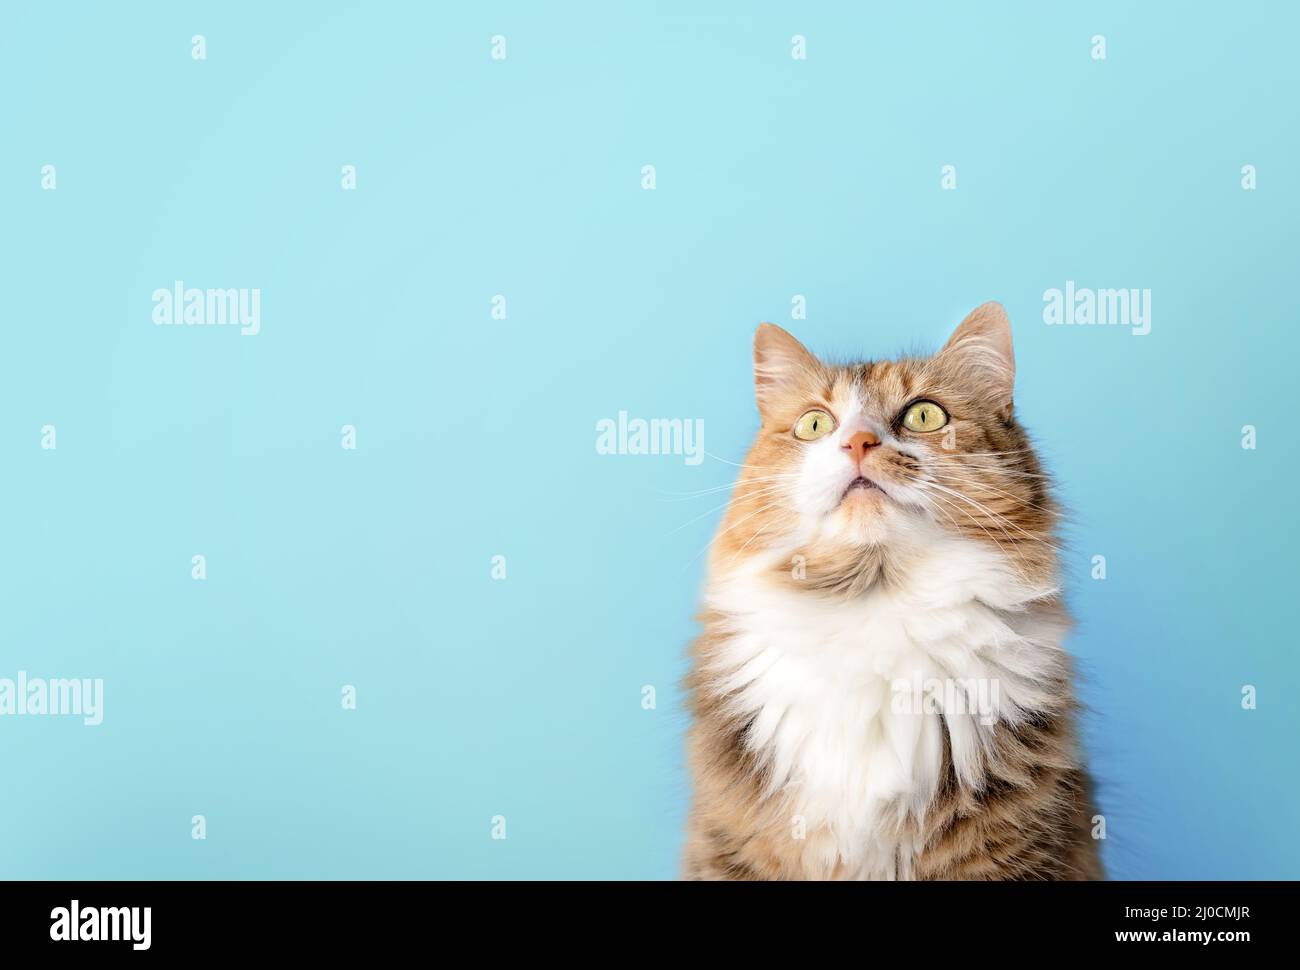 Fluffy cat looking up in front of blue background. Long hair female calico or torbie cat staring with intense expression at something above. Pet on co Stock Photo